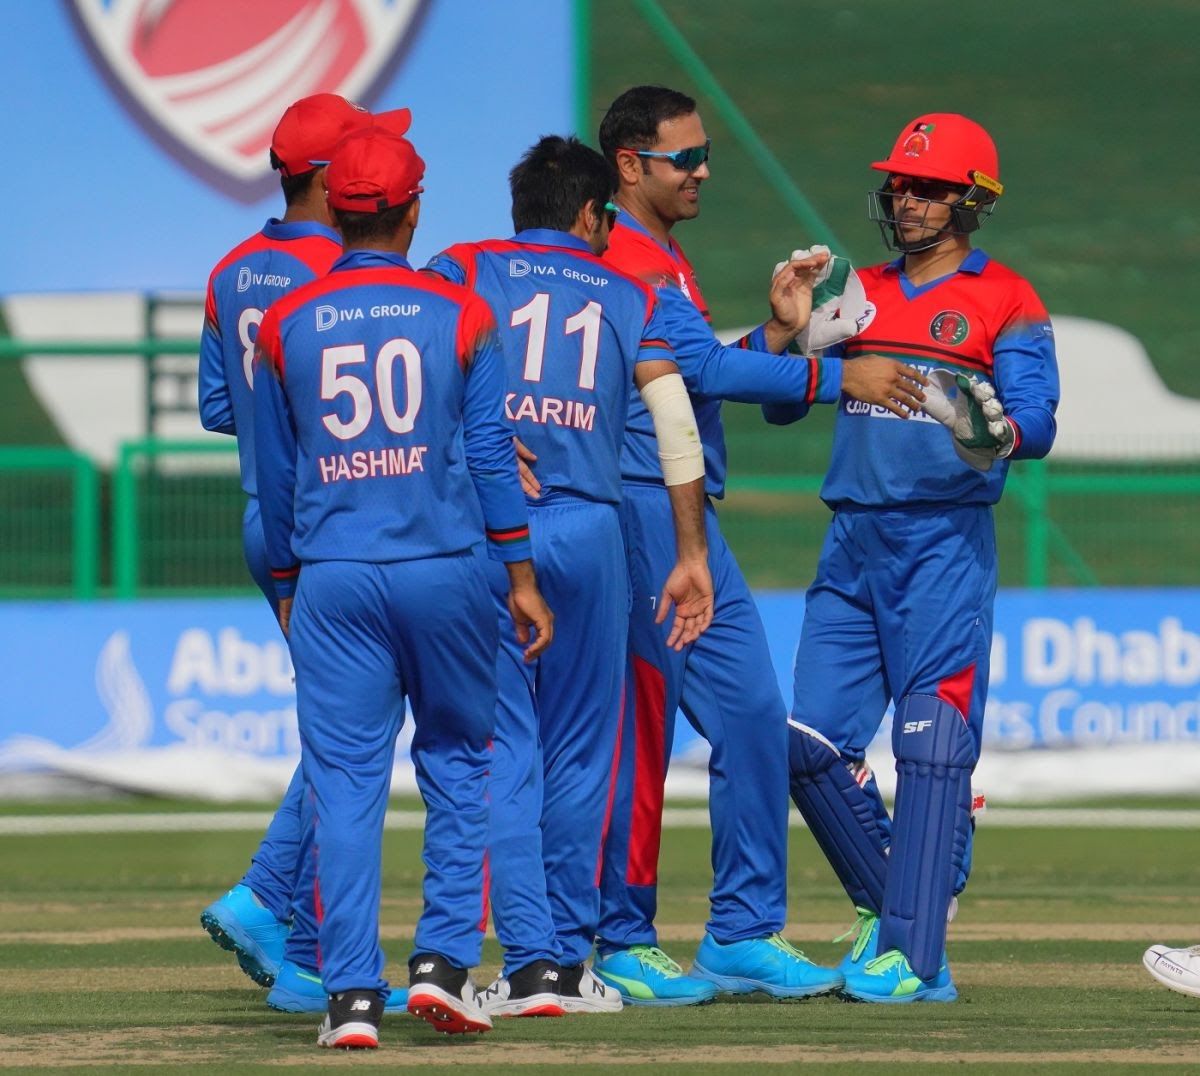 Afghanistan to participate in the Men's T20 World Cup